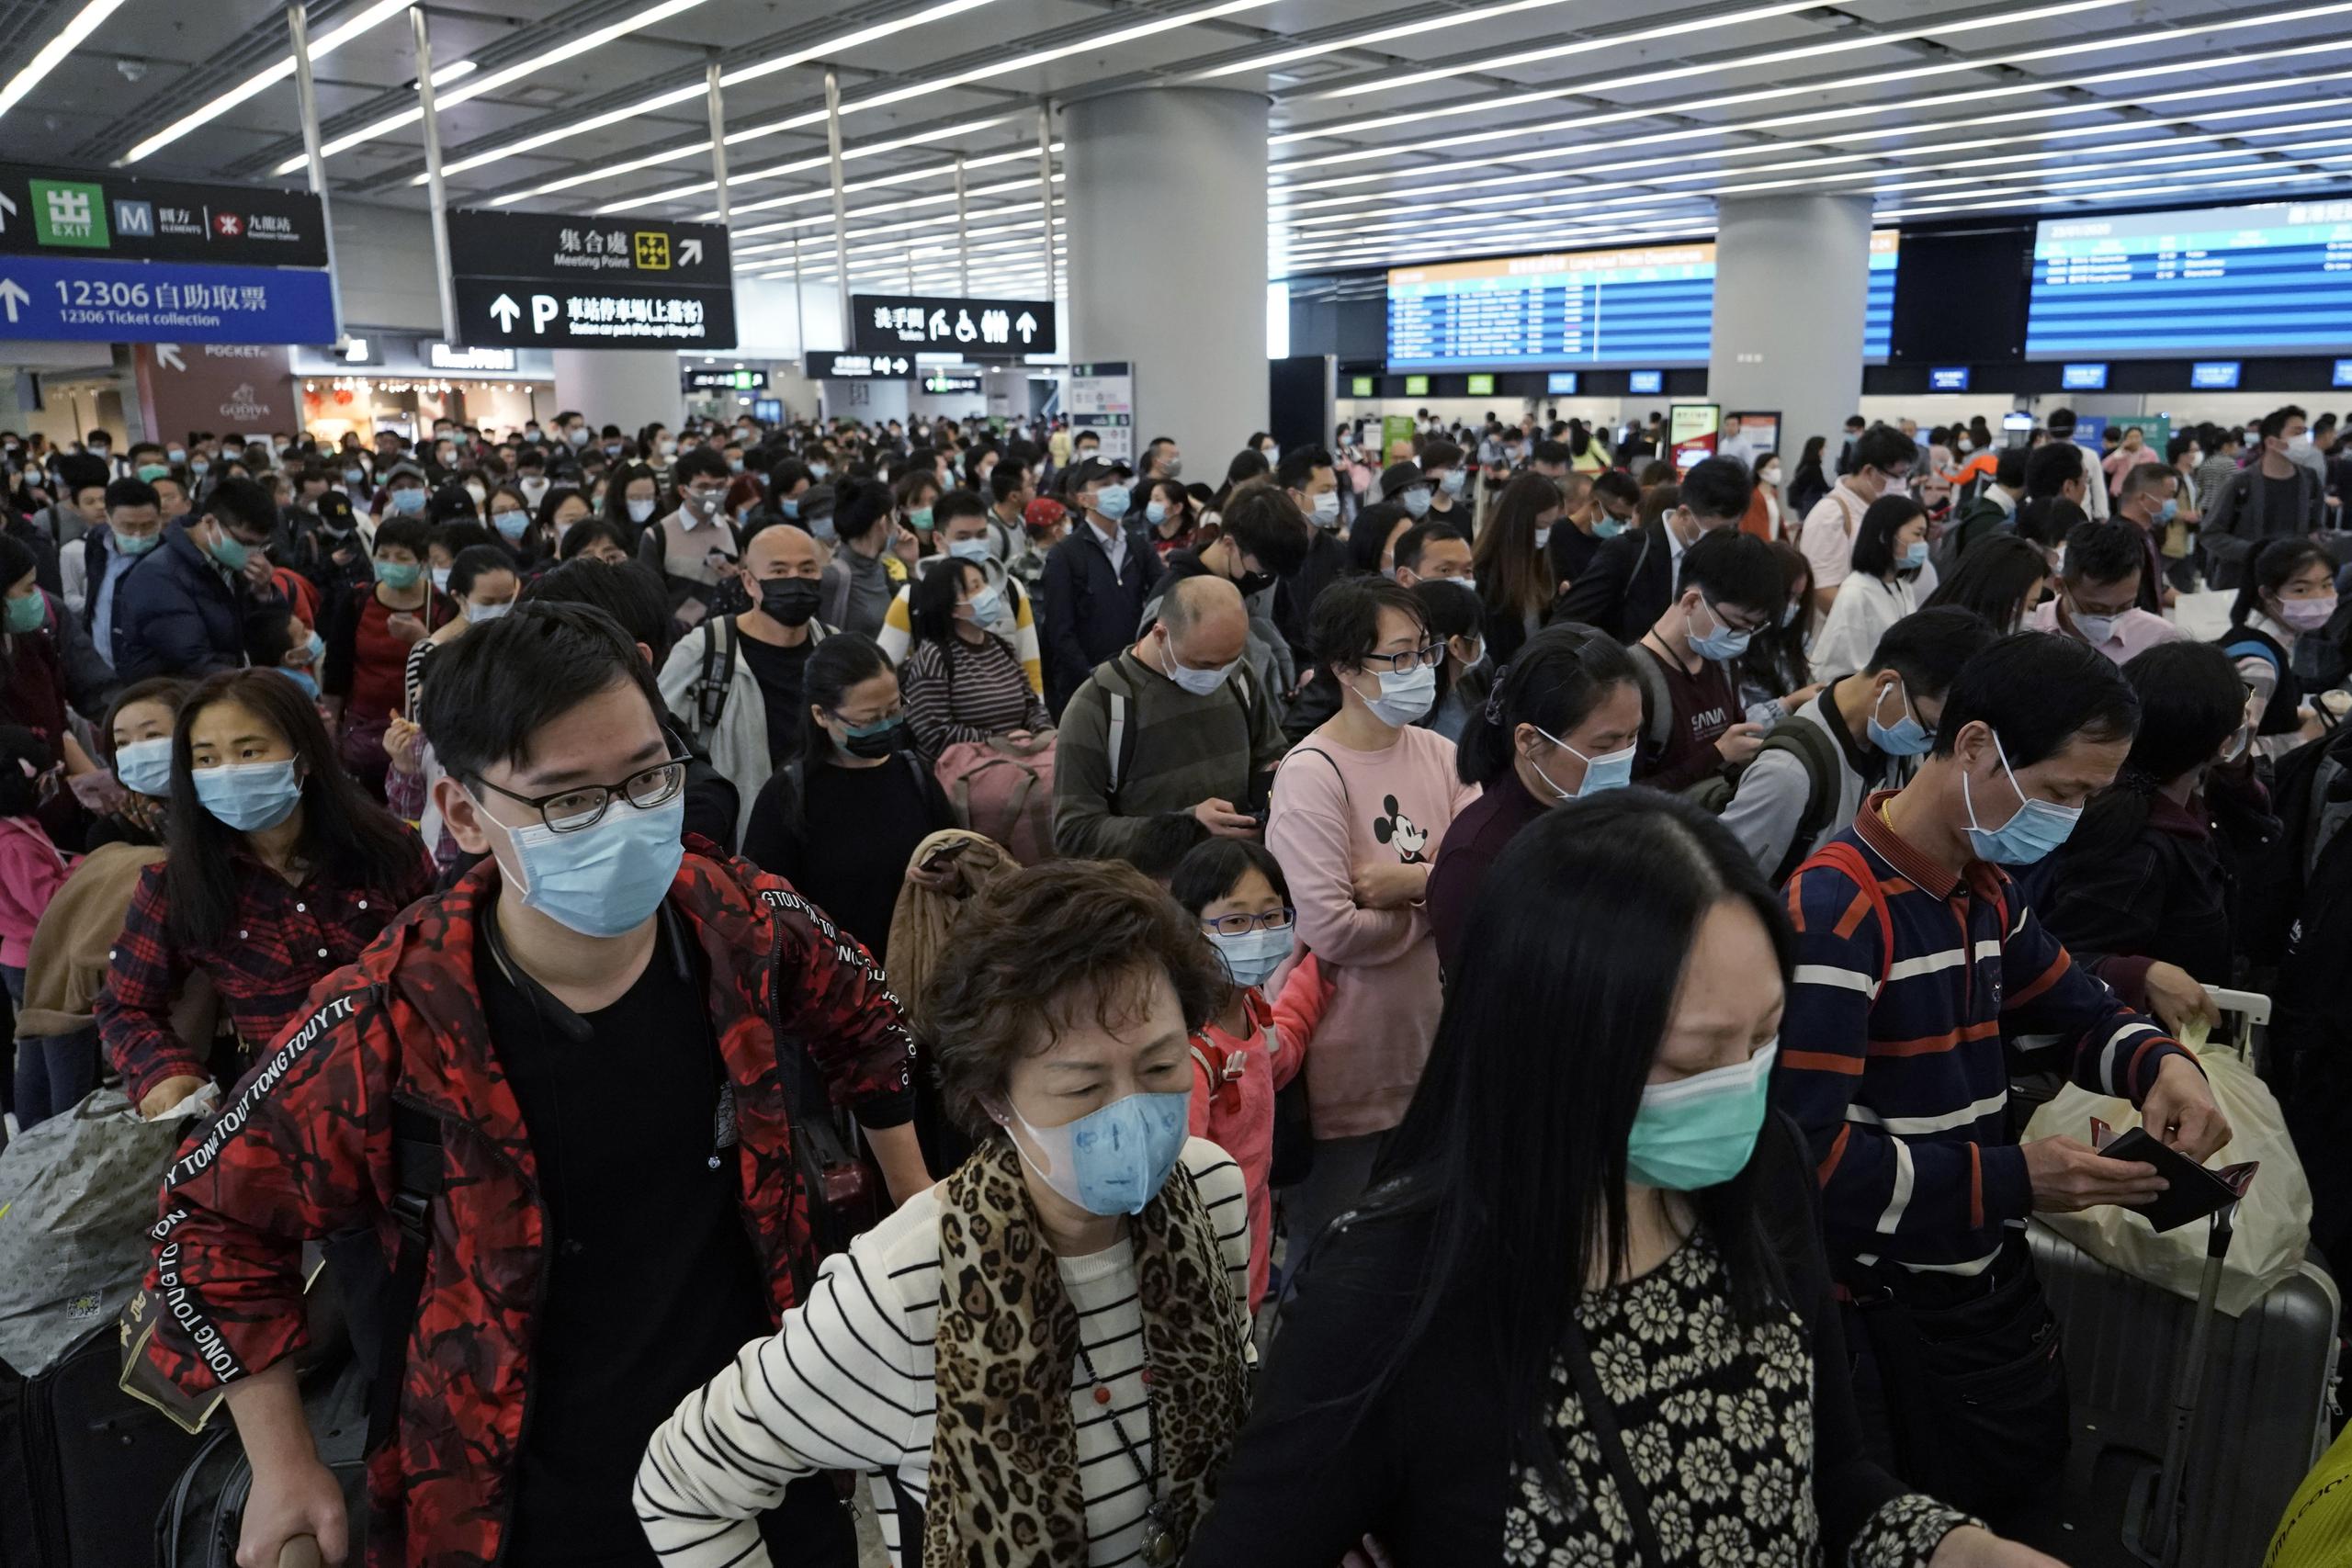 FILE - In this Thursday, Jan. 23, 2020 file photo, Passengers wear protective face masks at the departure hall of the high speed train station in Hong Kong.  Fear about the effects of a new virus found in China is spreading faster through financial markets around the world than the sickness itself. U.S. stocks fell to their biggest weekly loss since early October on worries that the new coronavirus could ultimately hurt travel and global economic growth. (AP Photo/Kin Cheung, File)